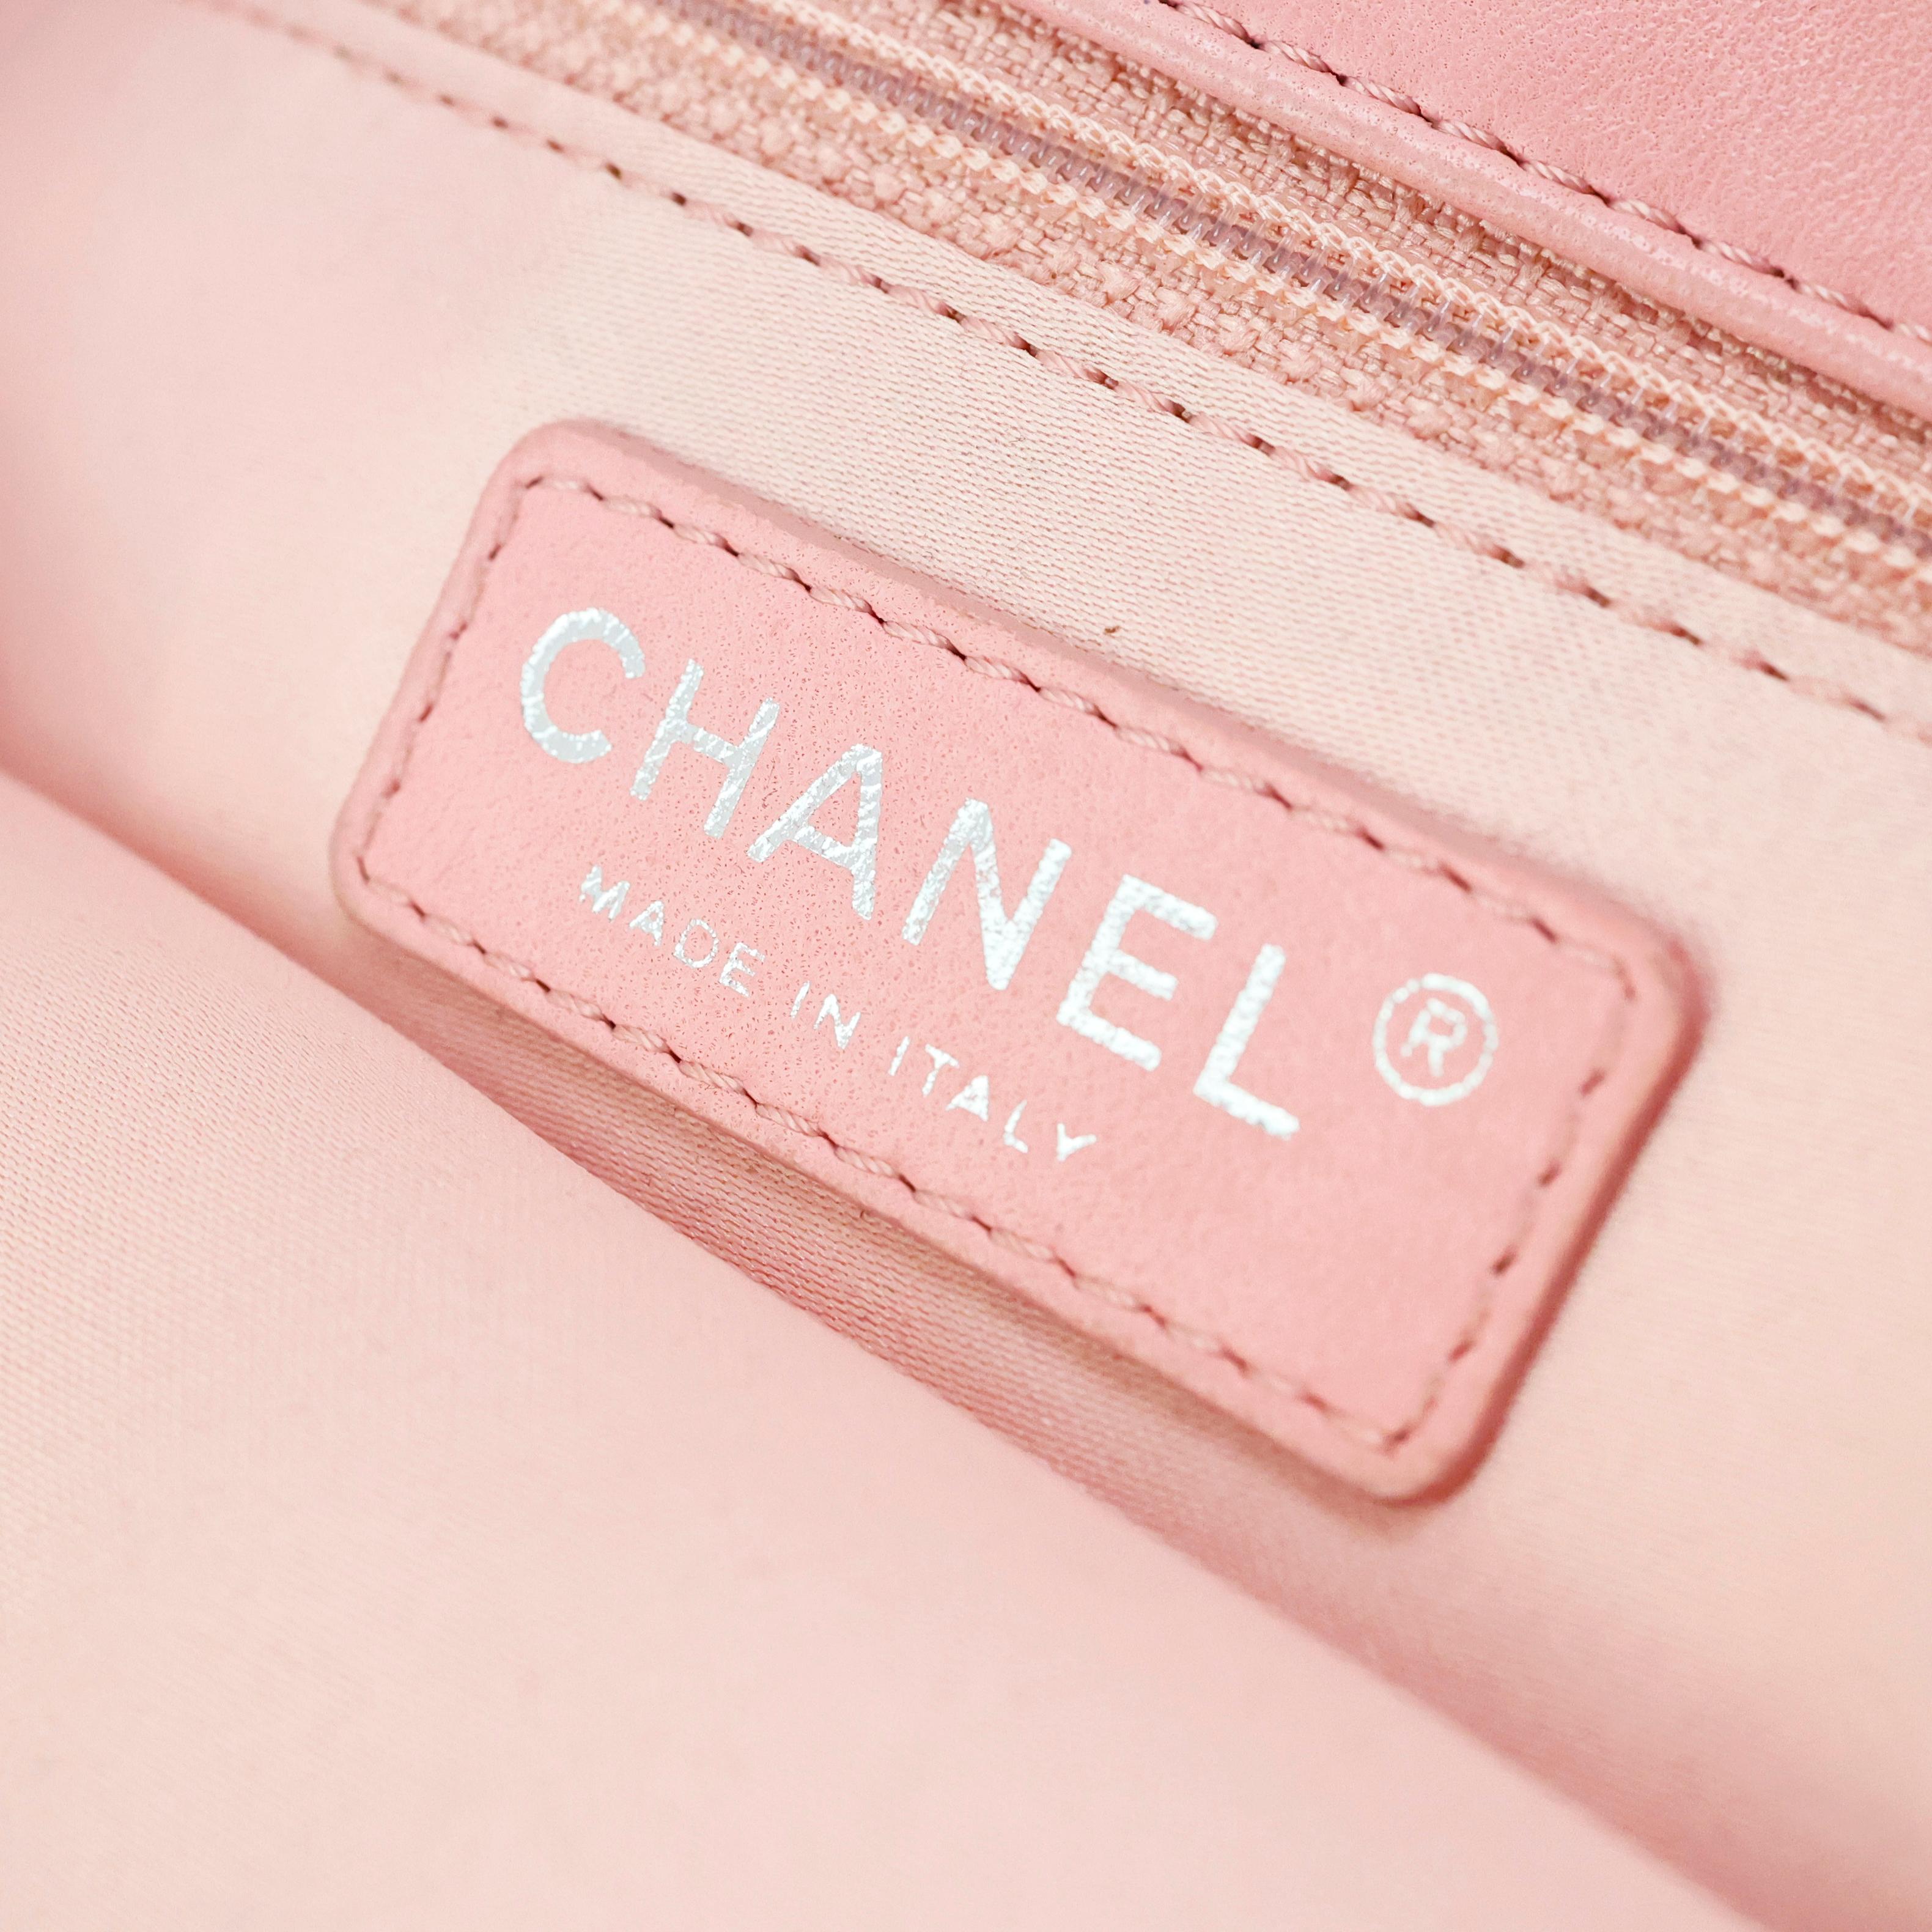 Chanel Classic Flap Bag in light pink Python leather For Sale 6